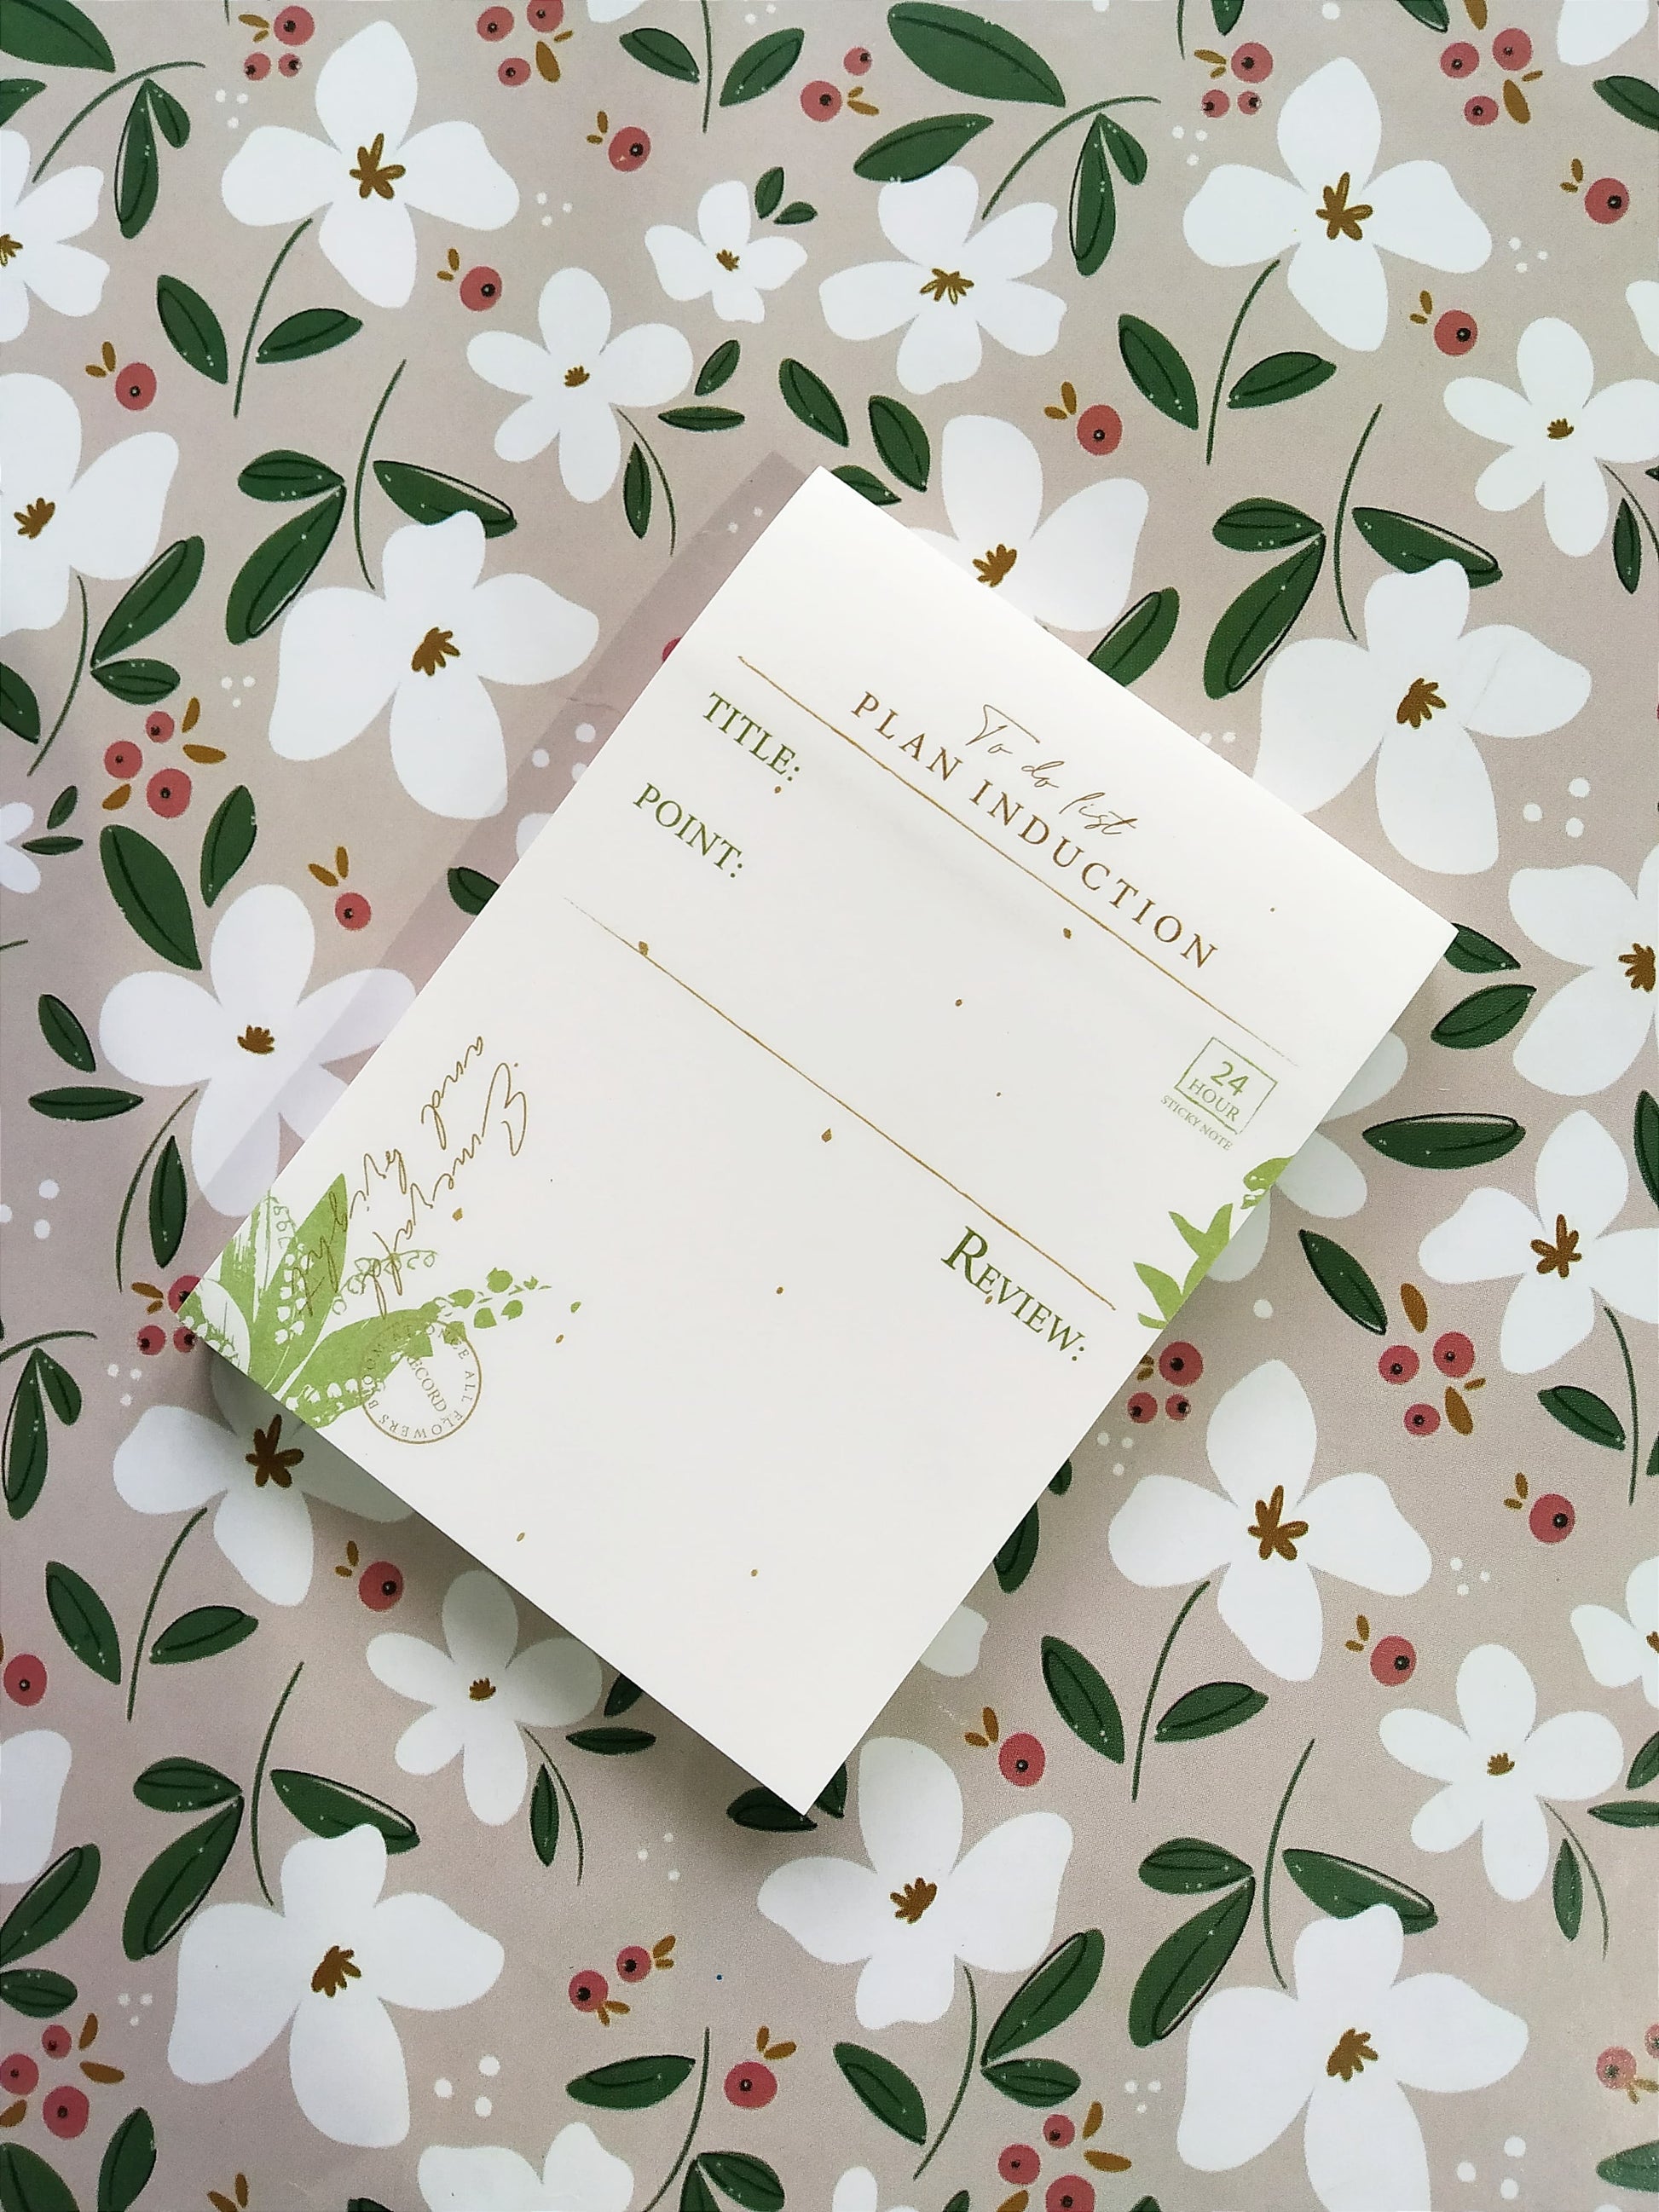 RUSHAB NOVELTY Sticky Notes Plan induction Botanical floral edition Sticky Notes I To do list types post it I Journaling notes